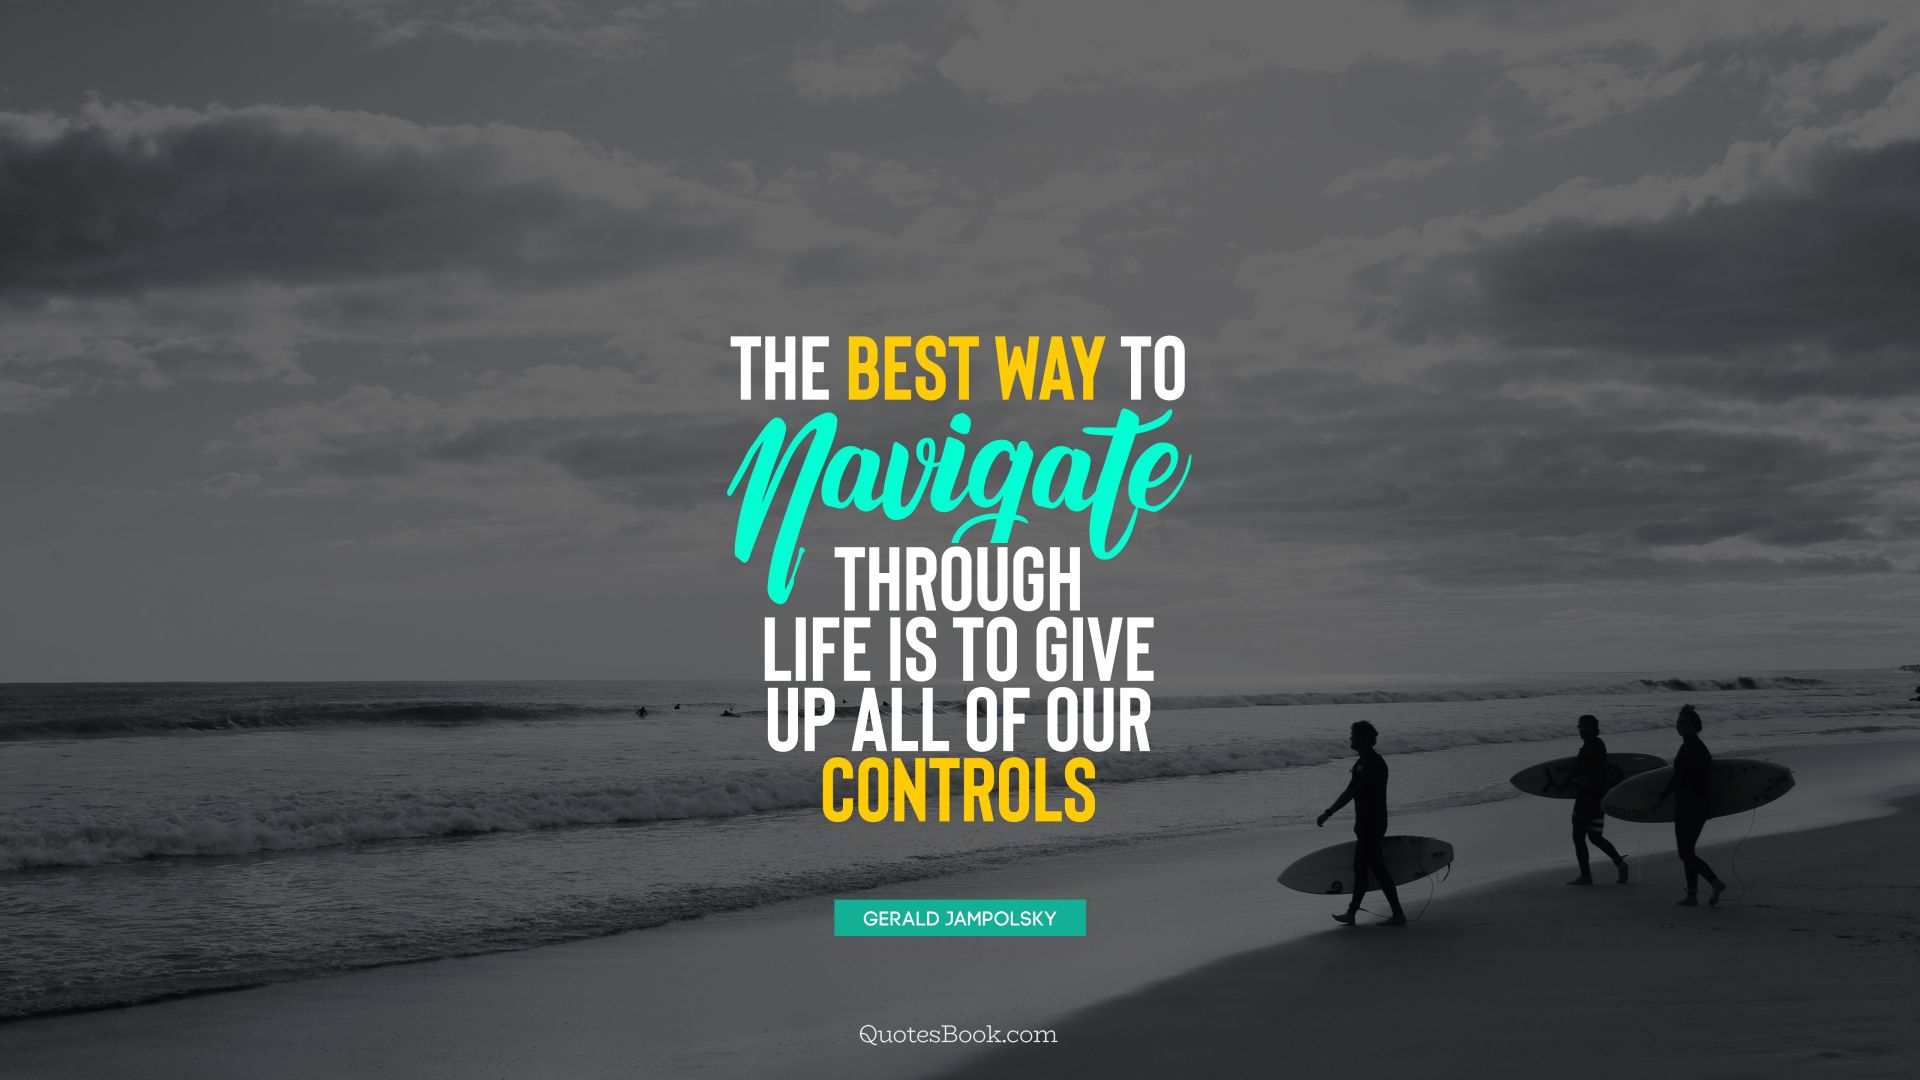 The best way to navigate through life is to give up all of our controls. - Quote by Gerald Jampolsky